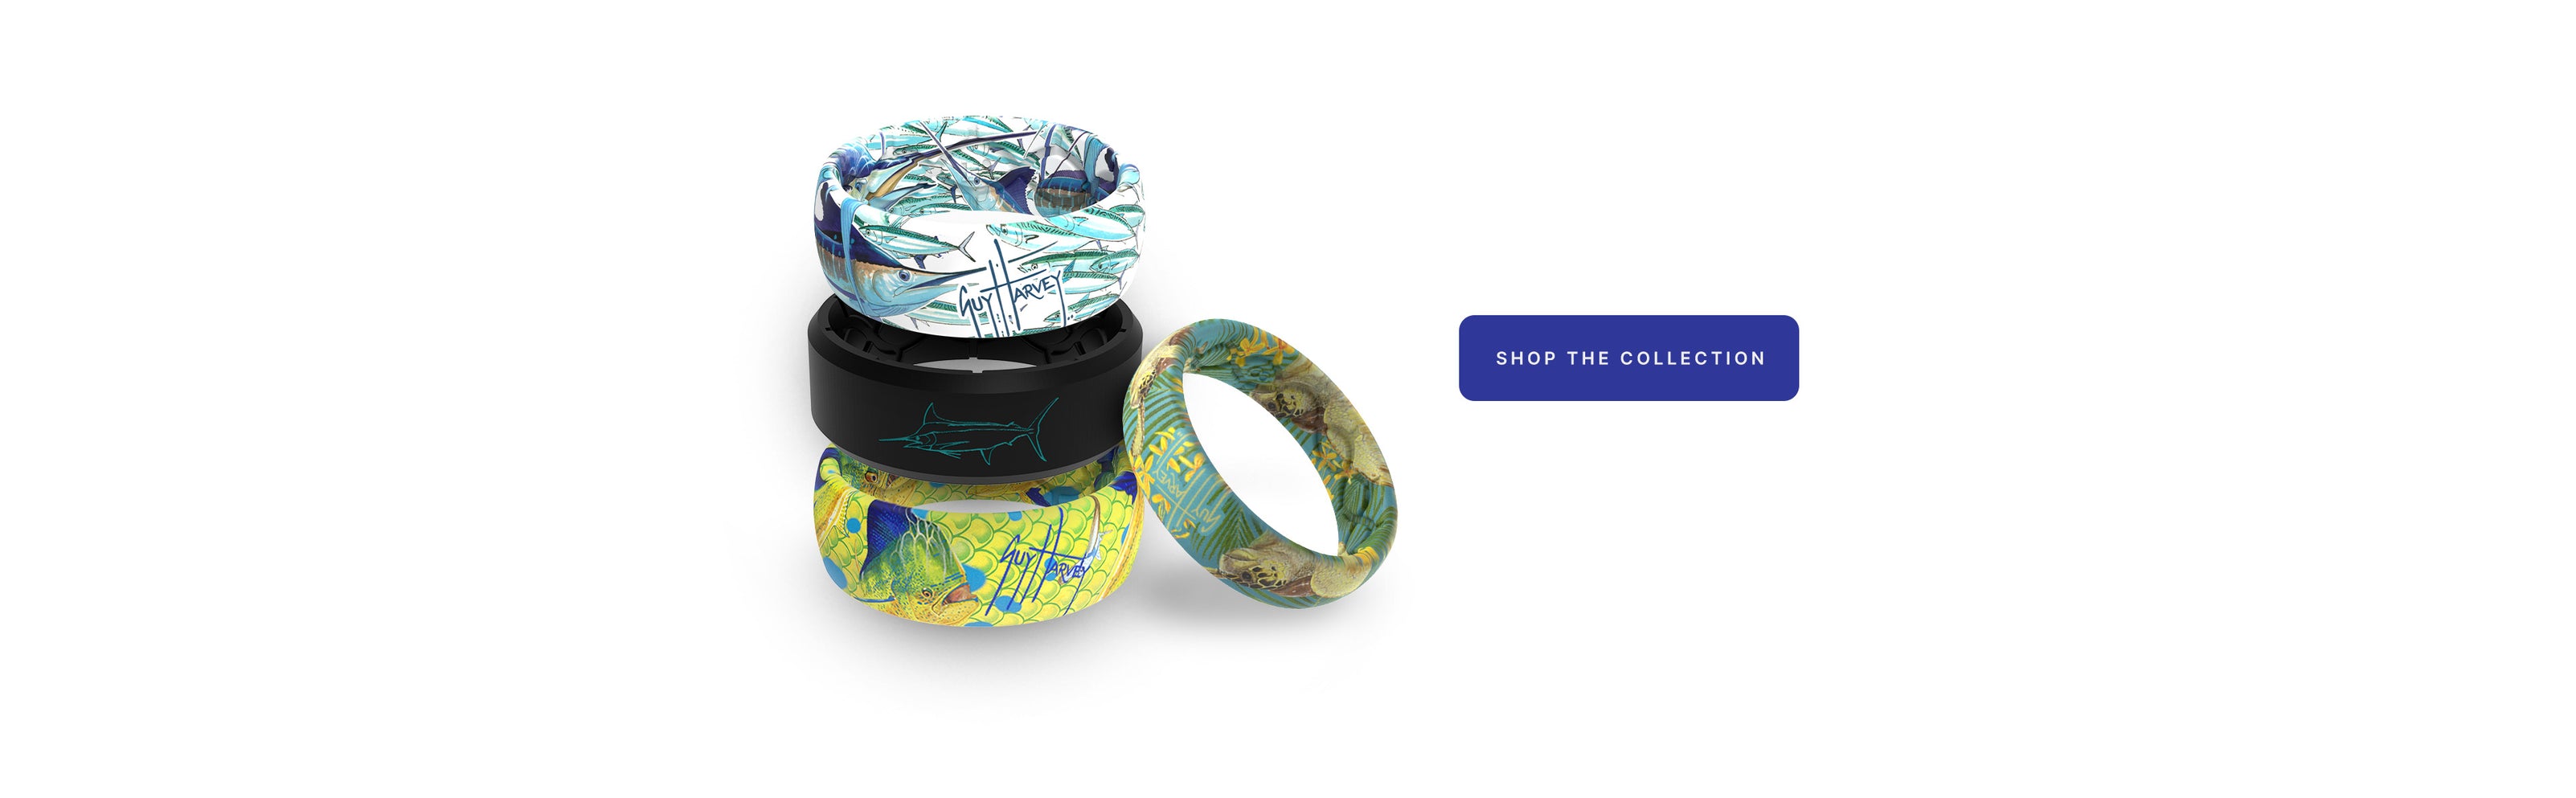 Shop the Guy Harvey collection